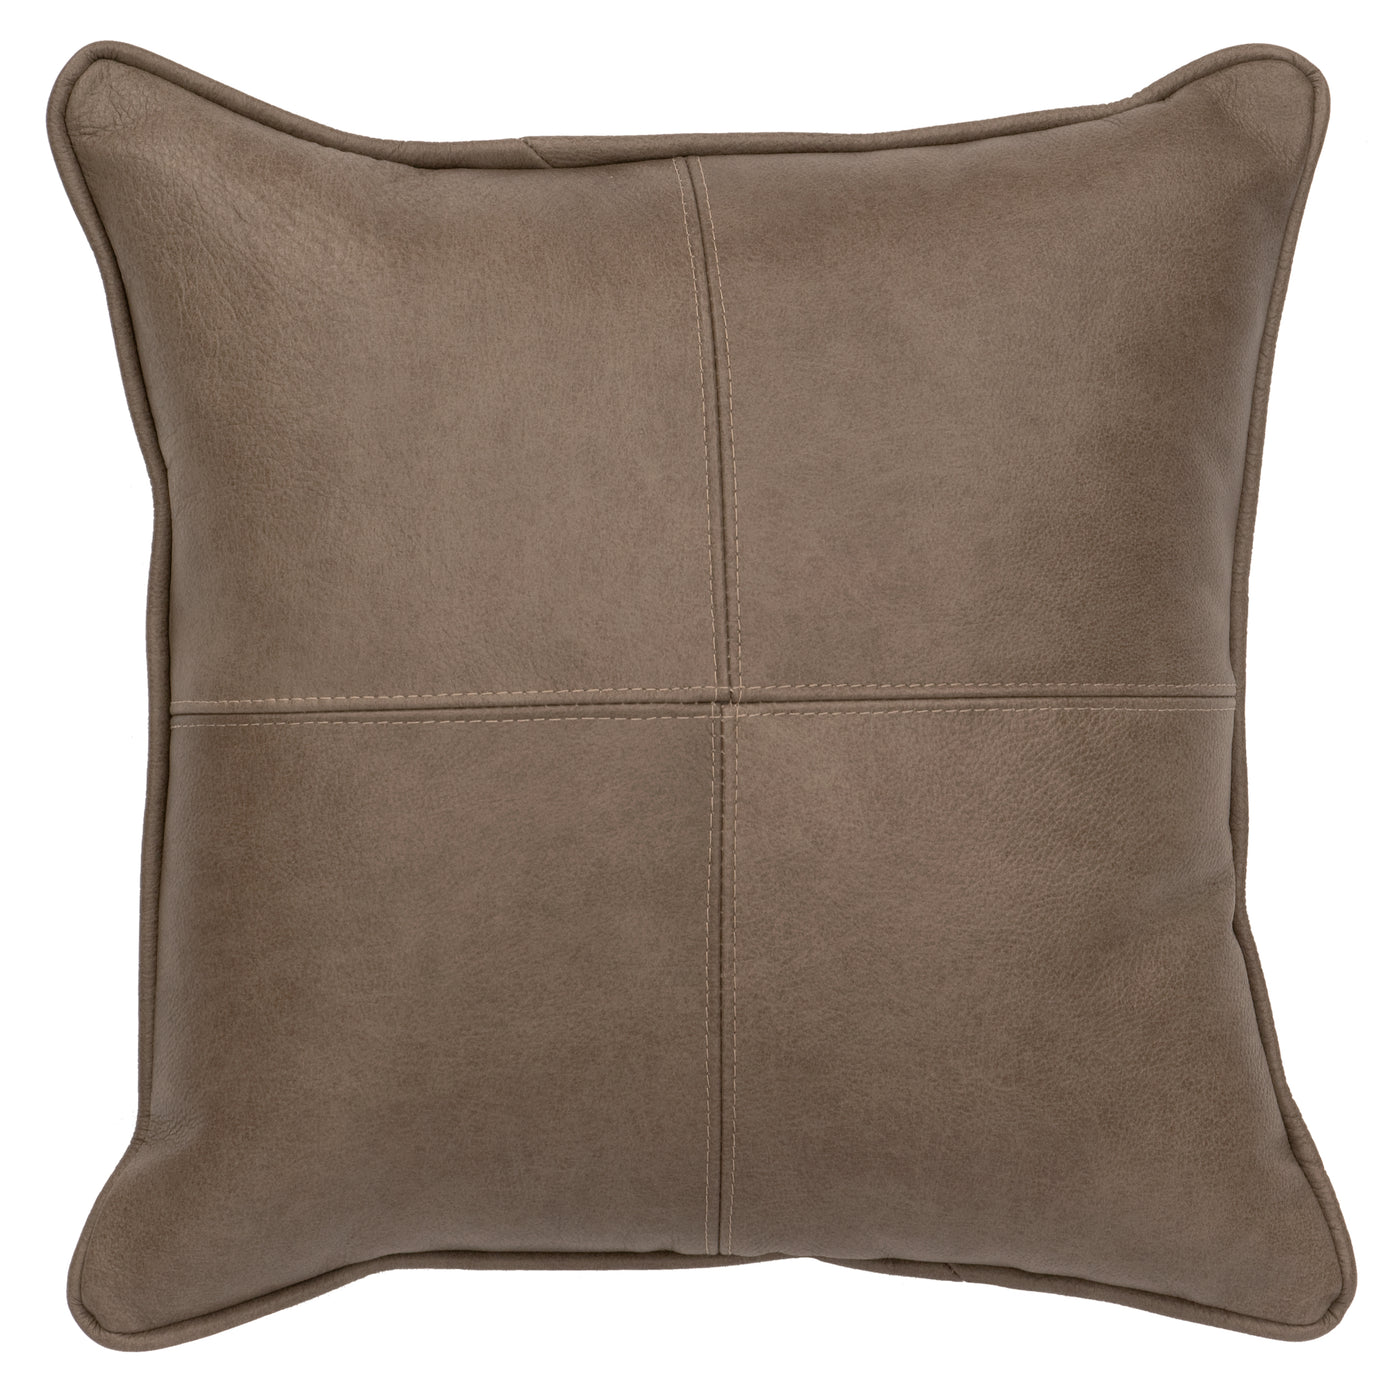 Canvello Silver Fox Leather Pillow - Fabric Back - 16" x 16"